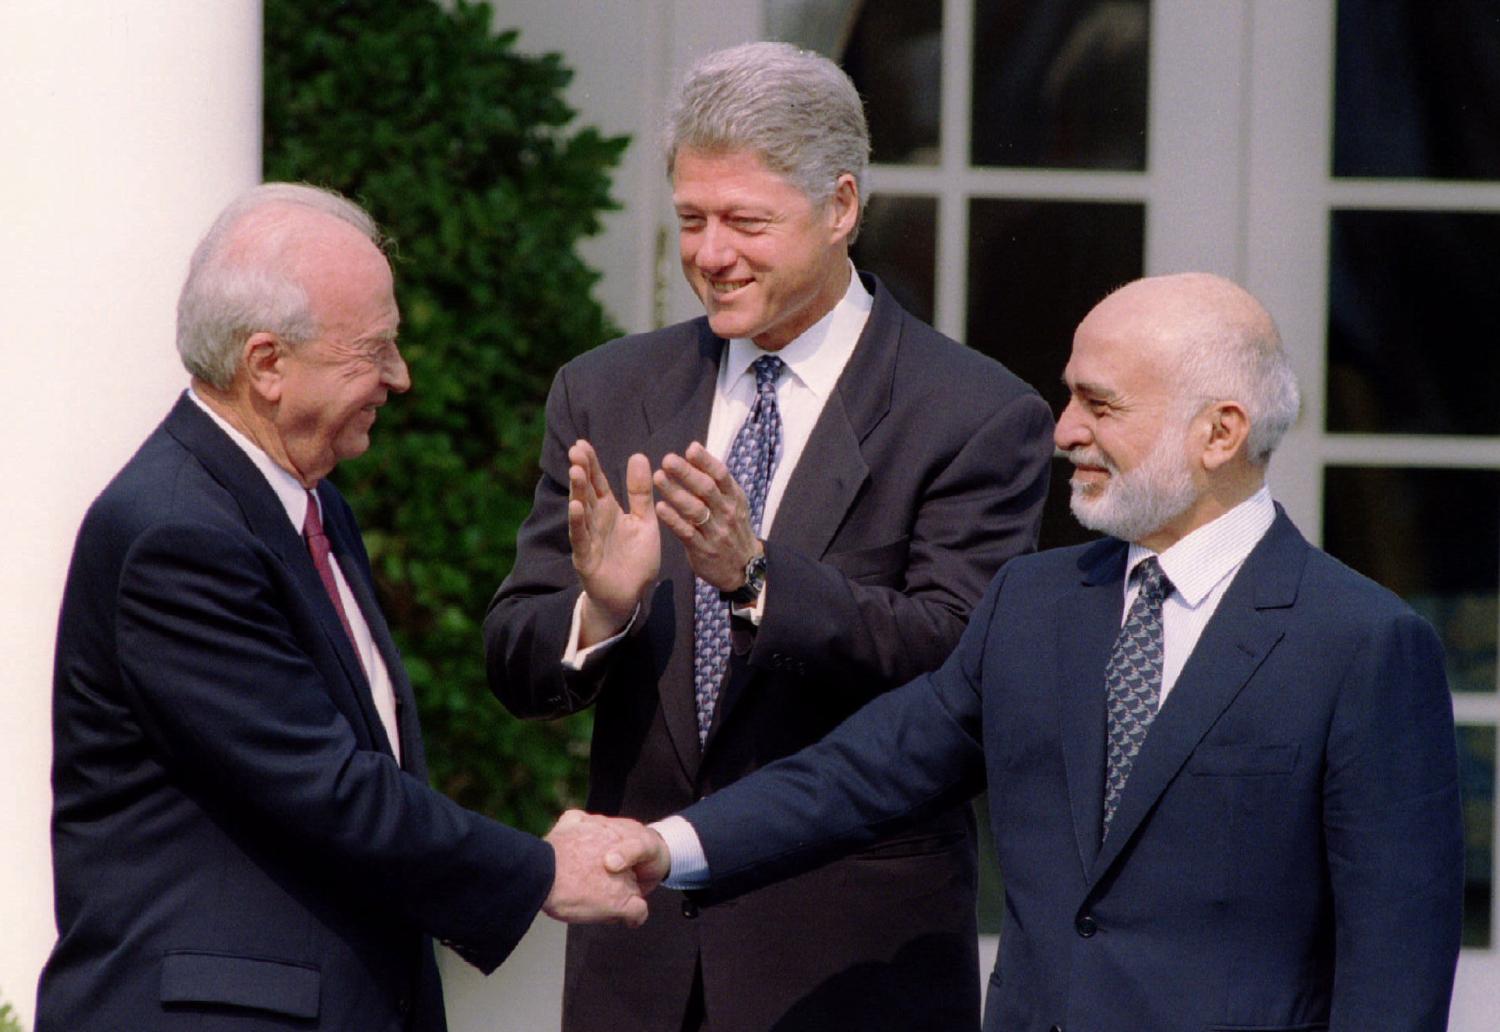 Israeli Prime Minister Yitzhak Rabin (L) and Jordan's King Hussein (R) grasp hands enthusiastically at the start of a Rose Garden ceremony welcoming them to the White House as President Clinton applauds July 25, 1994 in Washington. The leaders of Israel and Jordan shook hands ending nearly a half-century of antagonism and signalling their intent to make a formal peace. SCANNED FROM NEGATIVE REUTERS/Gary C. Cameron  AVD/CMC - RP1DRICQYTAG